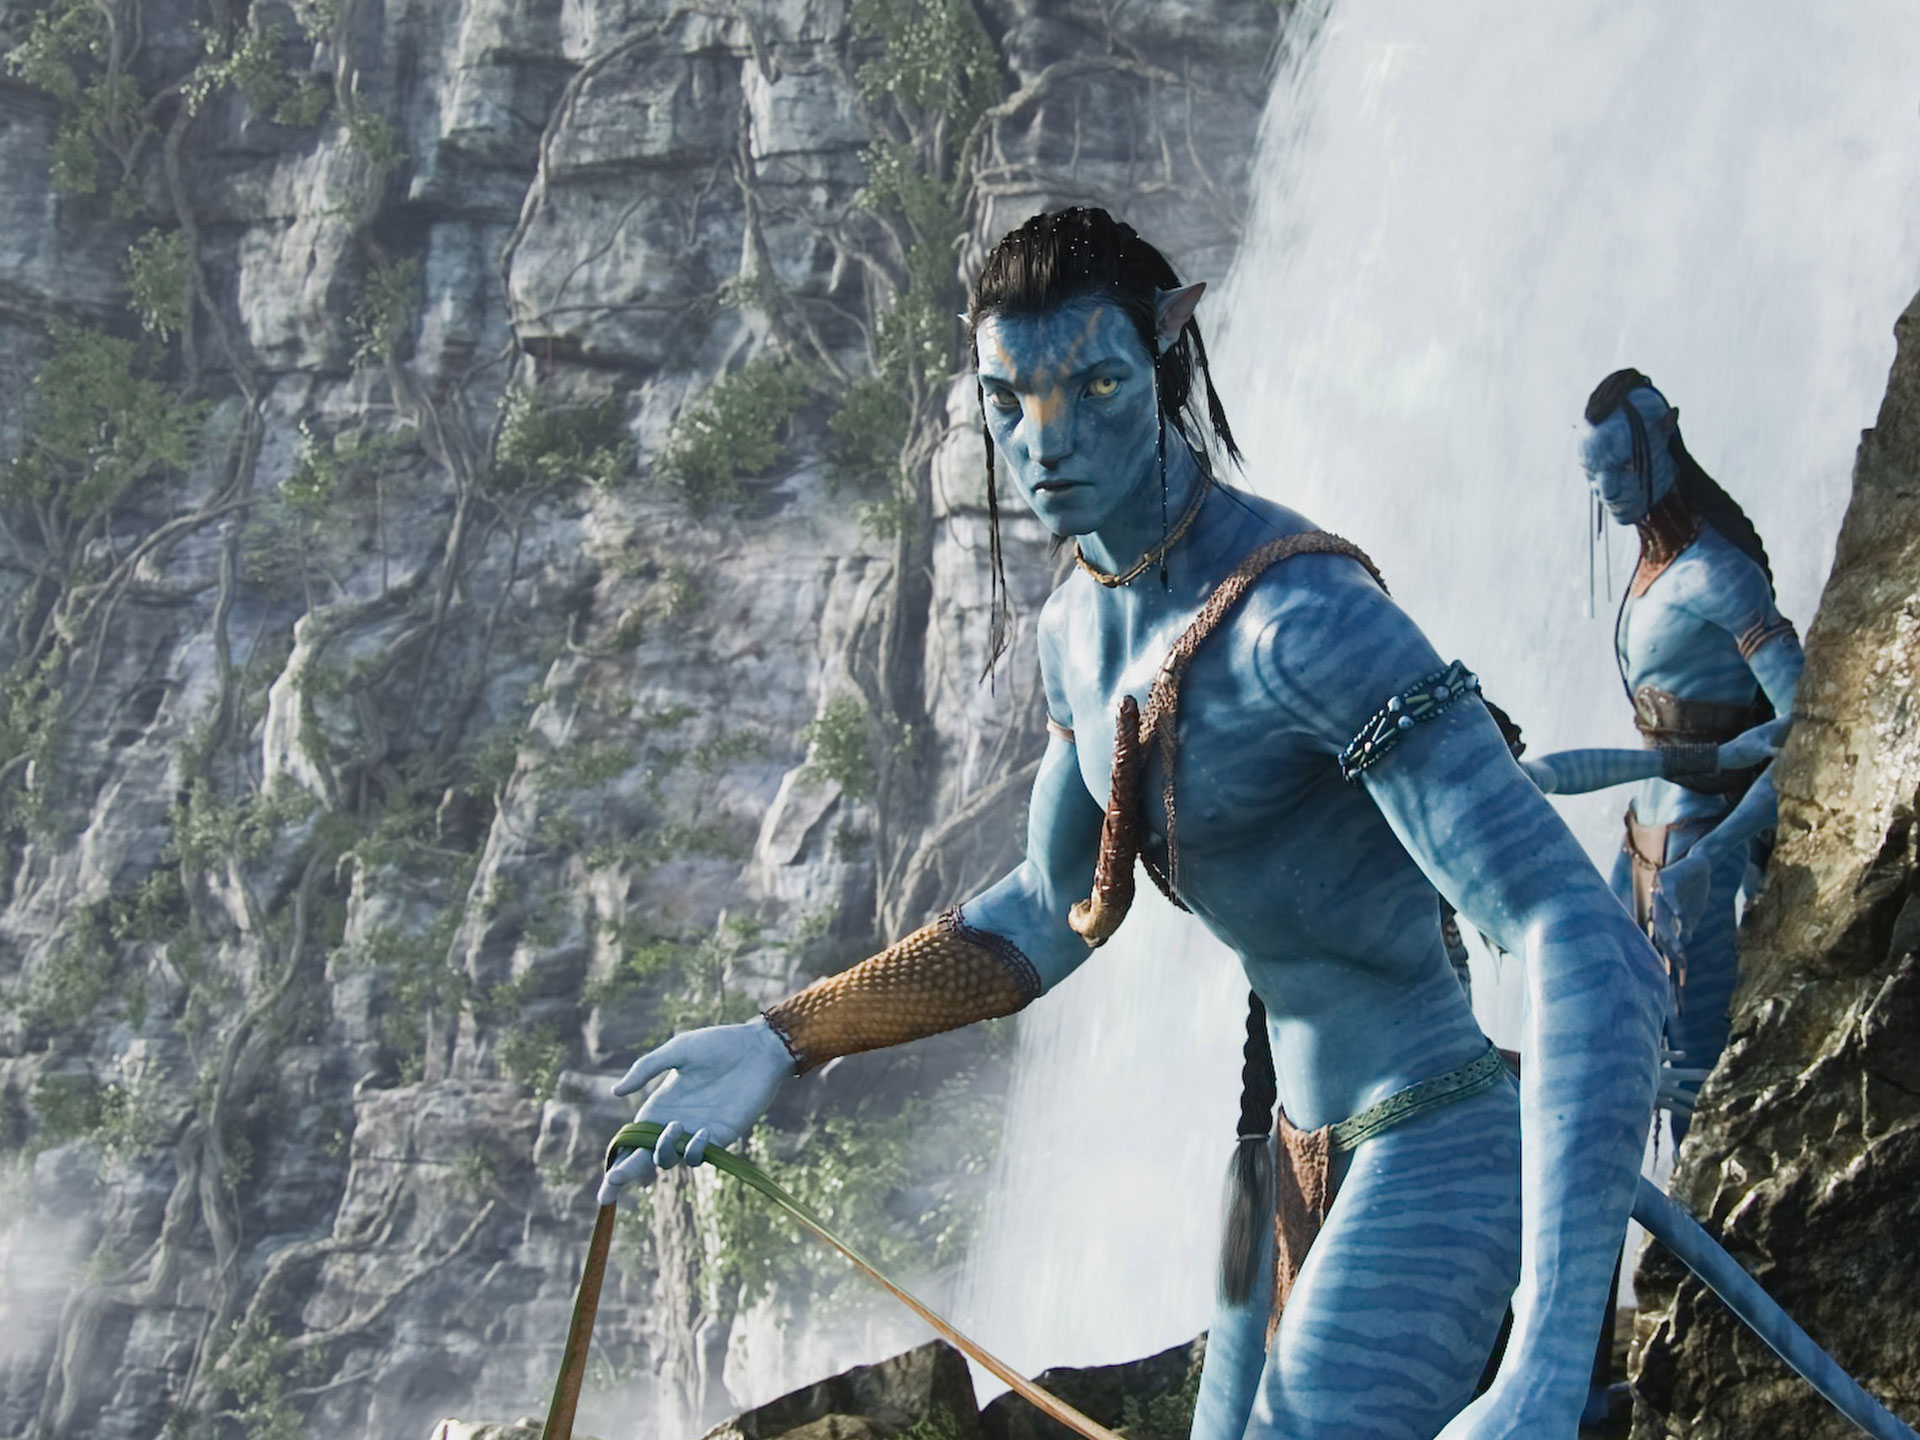 jake_sully_in_avatar_movie-normal